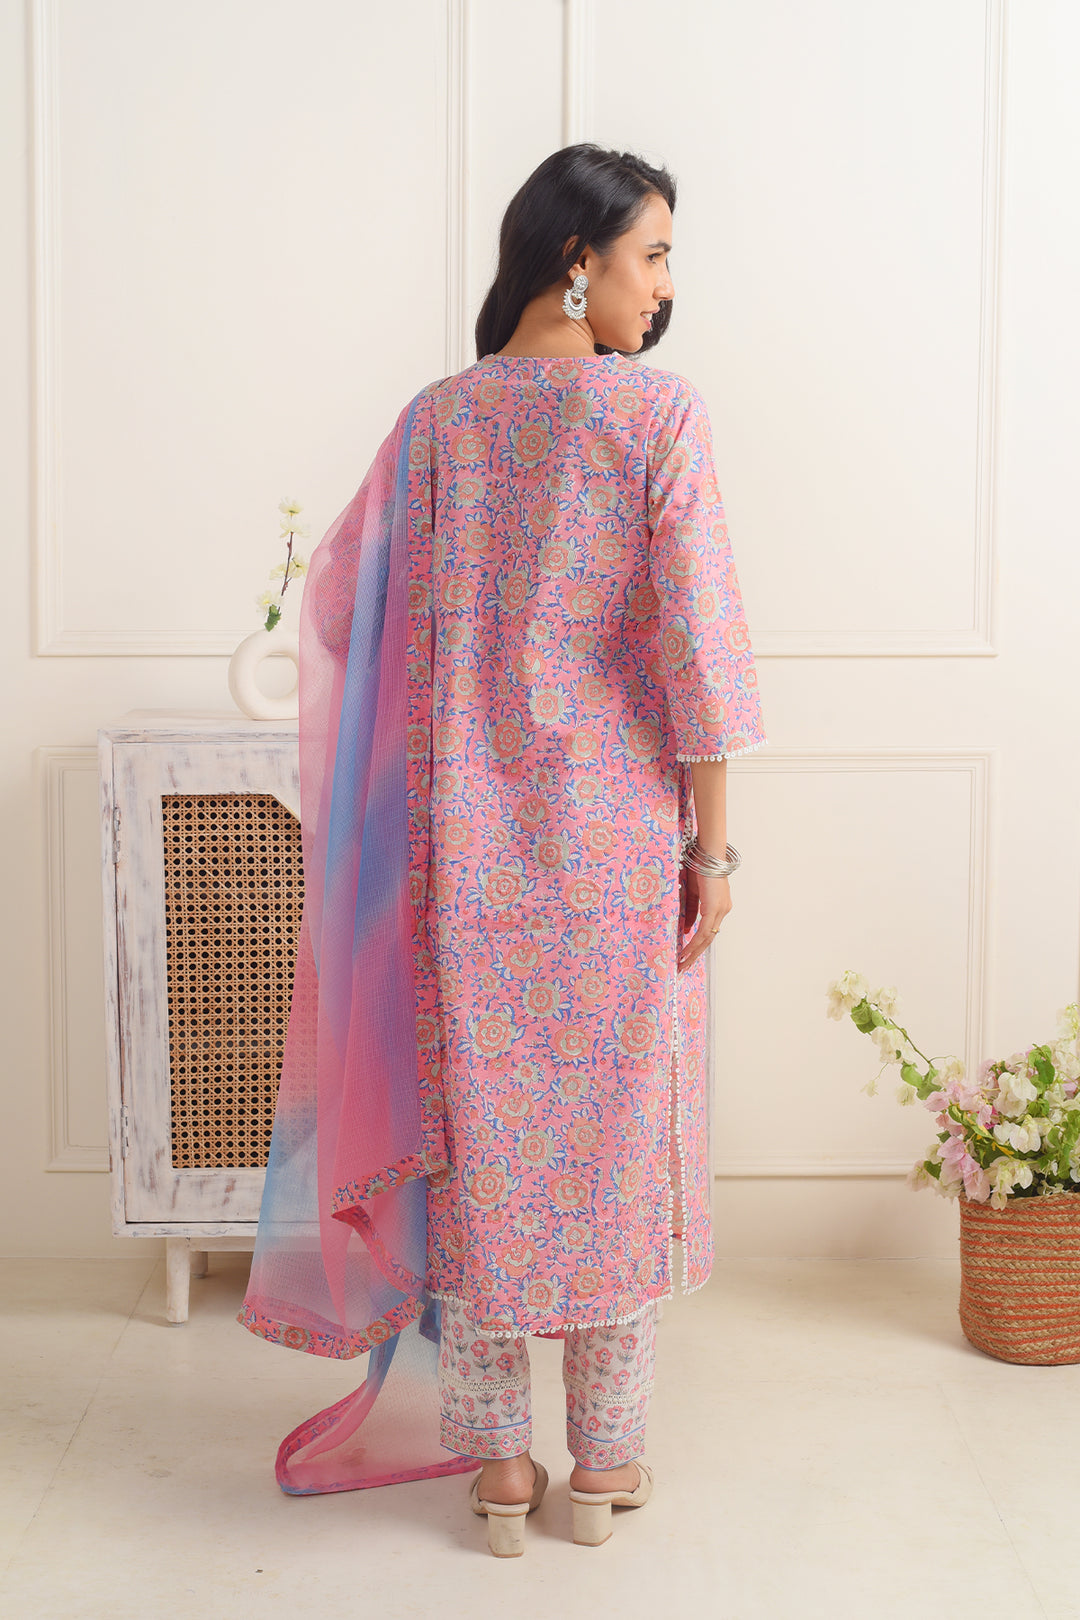 Gulbano Pink Jaal Suit set of 3